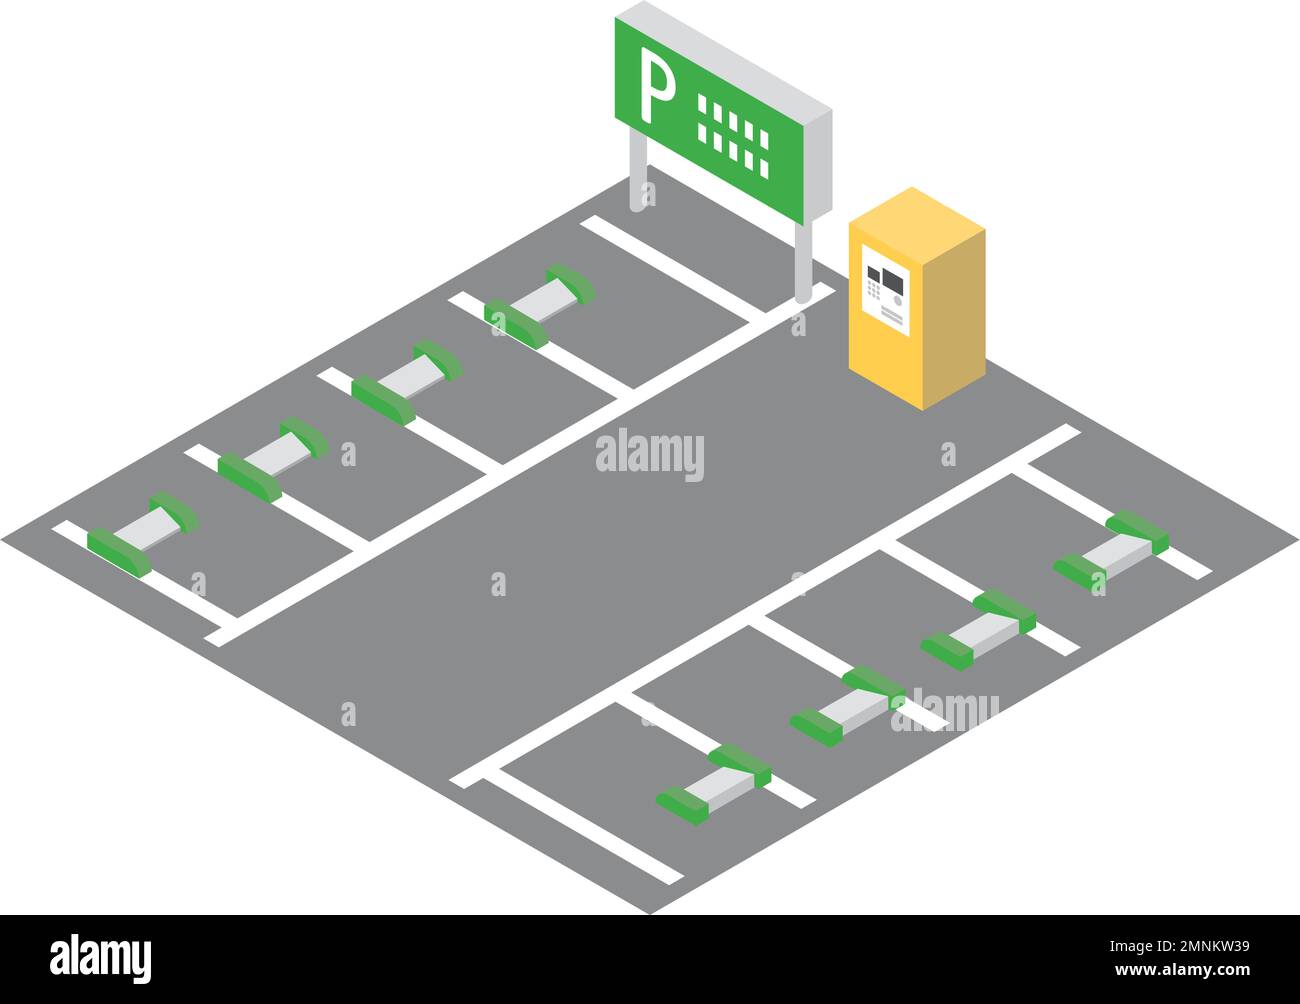 vector illustration of pay parking lot.   isometric illustration. Stock Vector